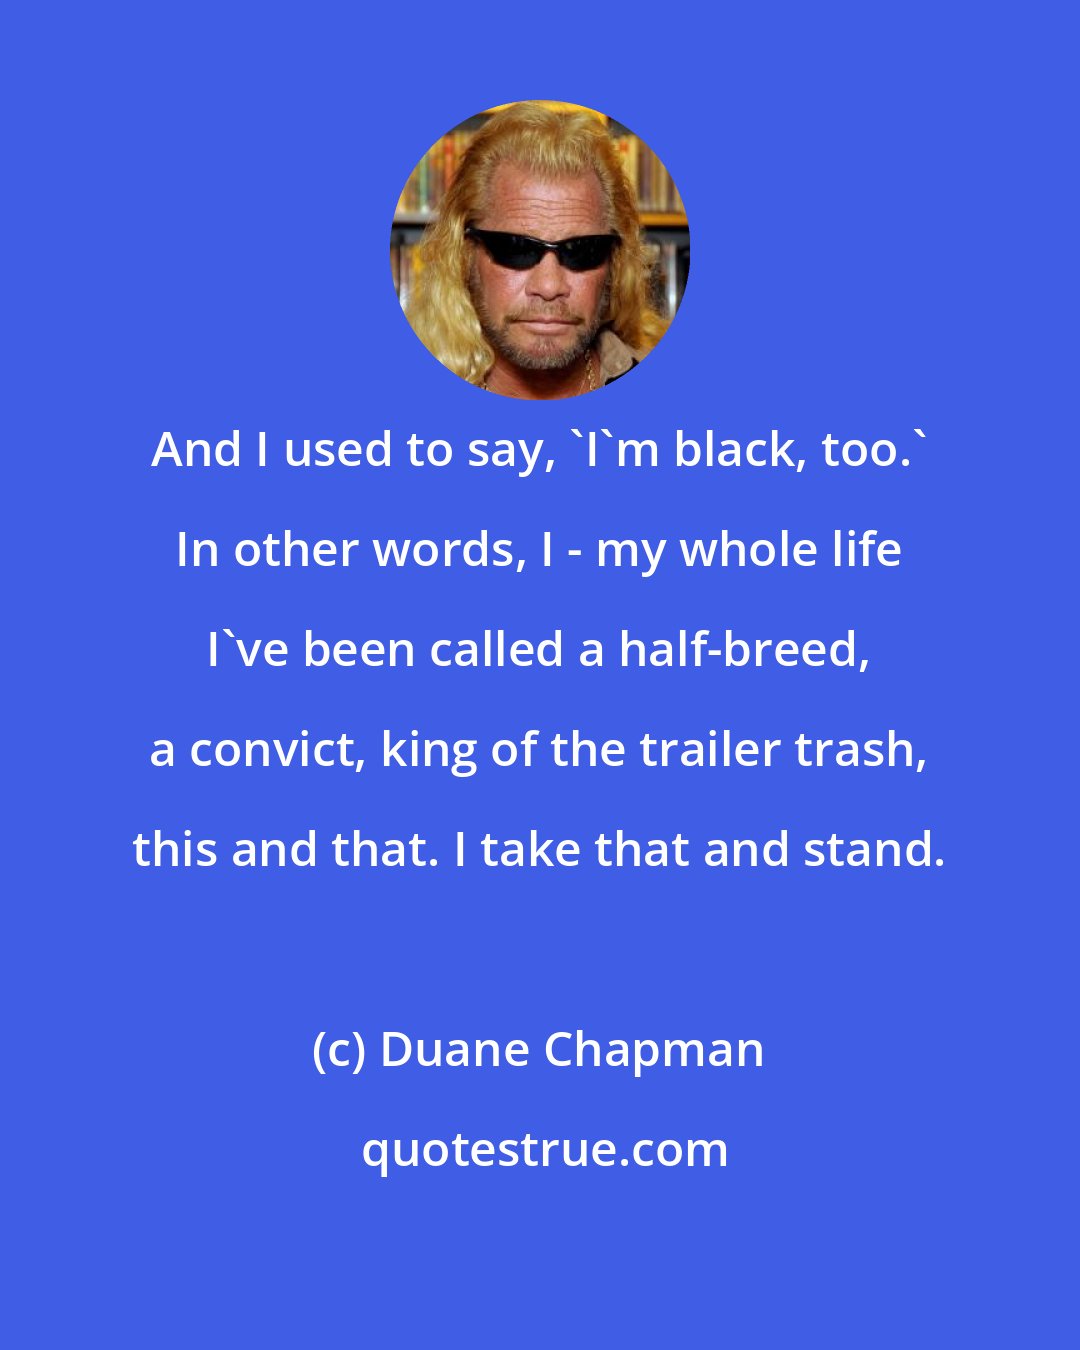 Duane Chapman: And I used to say, 'I'm black, too.' In other words, I - my whole life I've been called a half-breed, a convict, king of the trailer trash, this and that. I take that and stand.